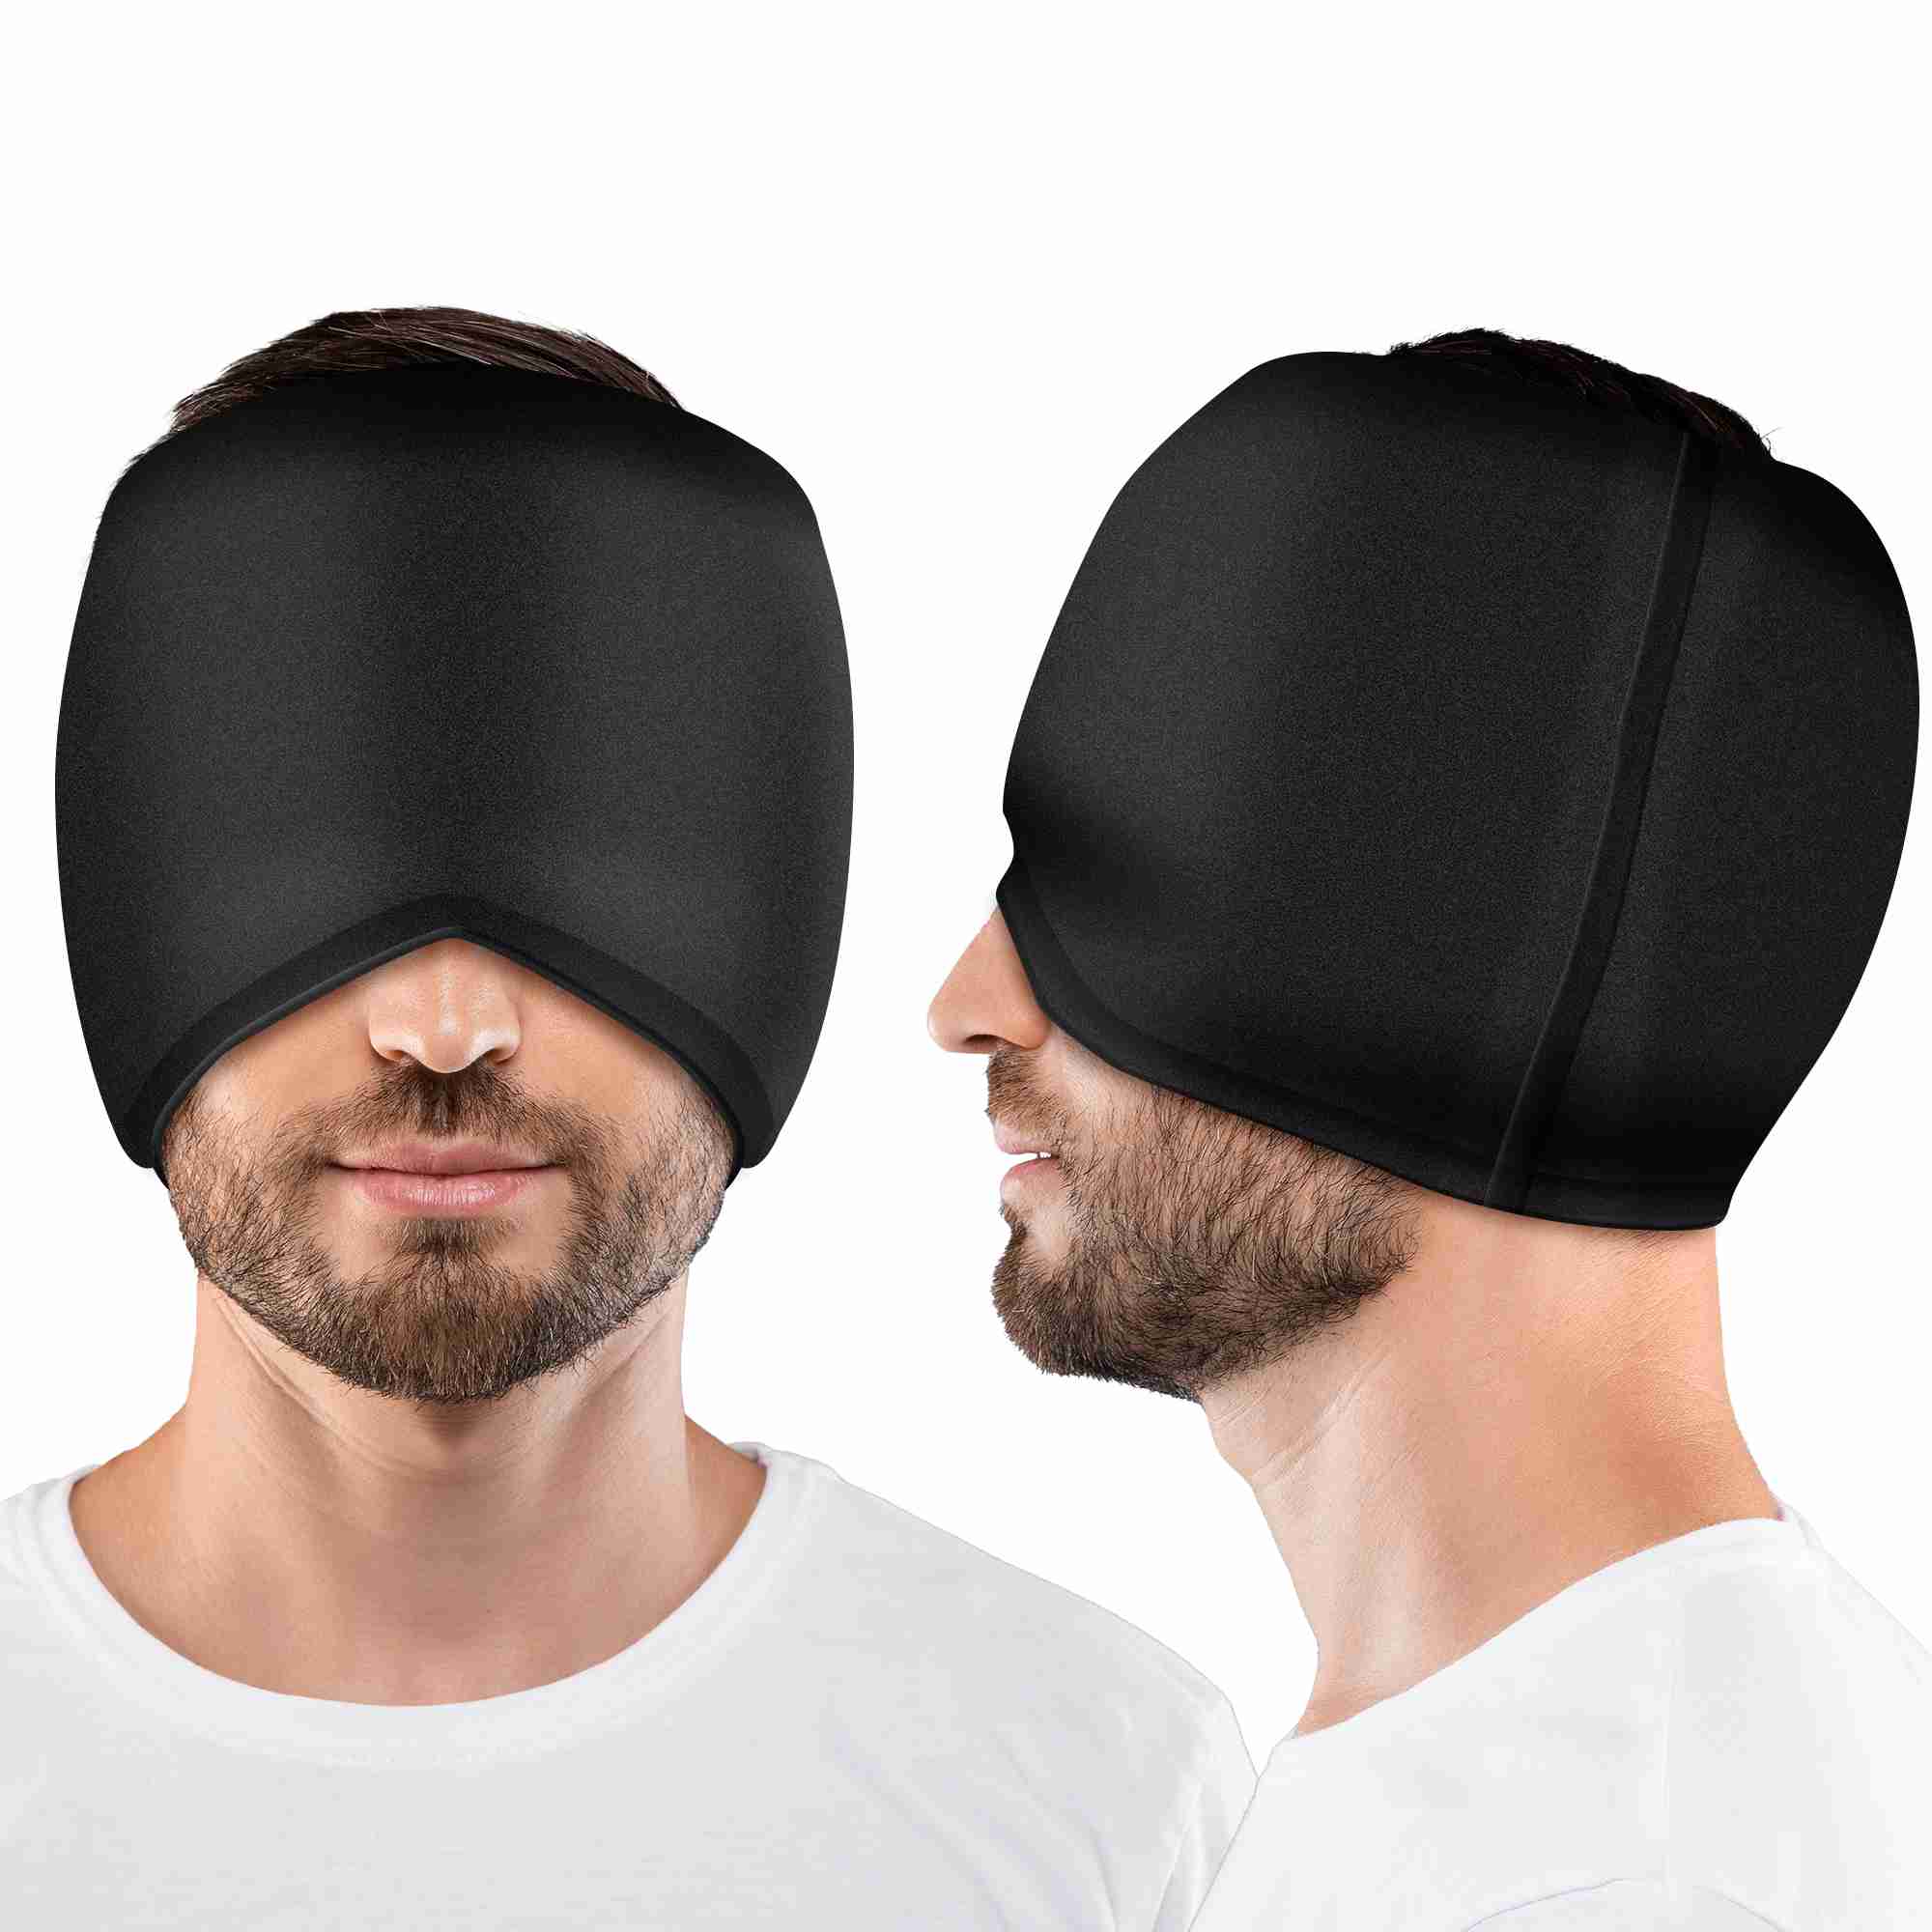 headache-hat-for-migraine with cash back rebate